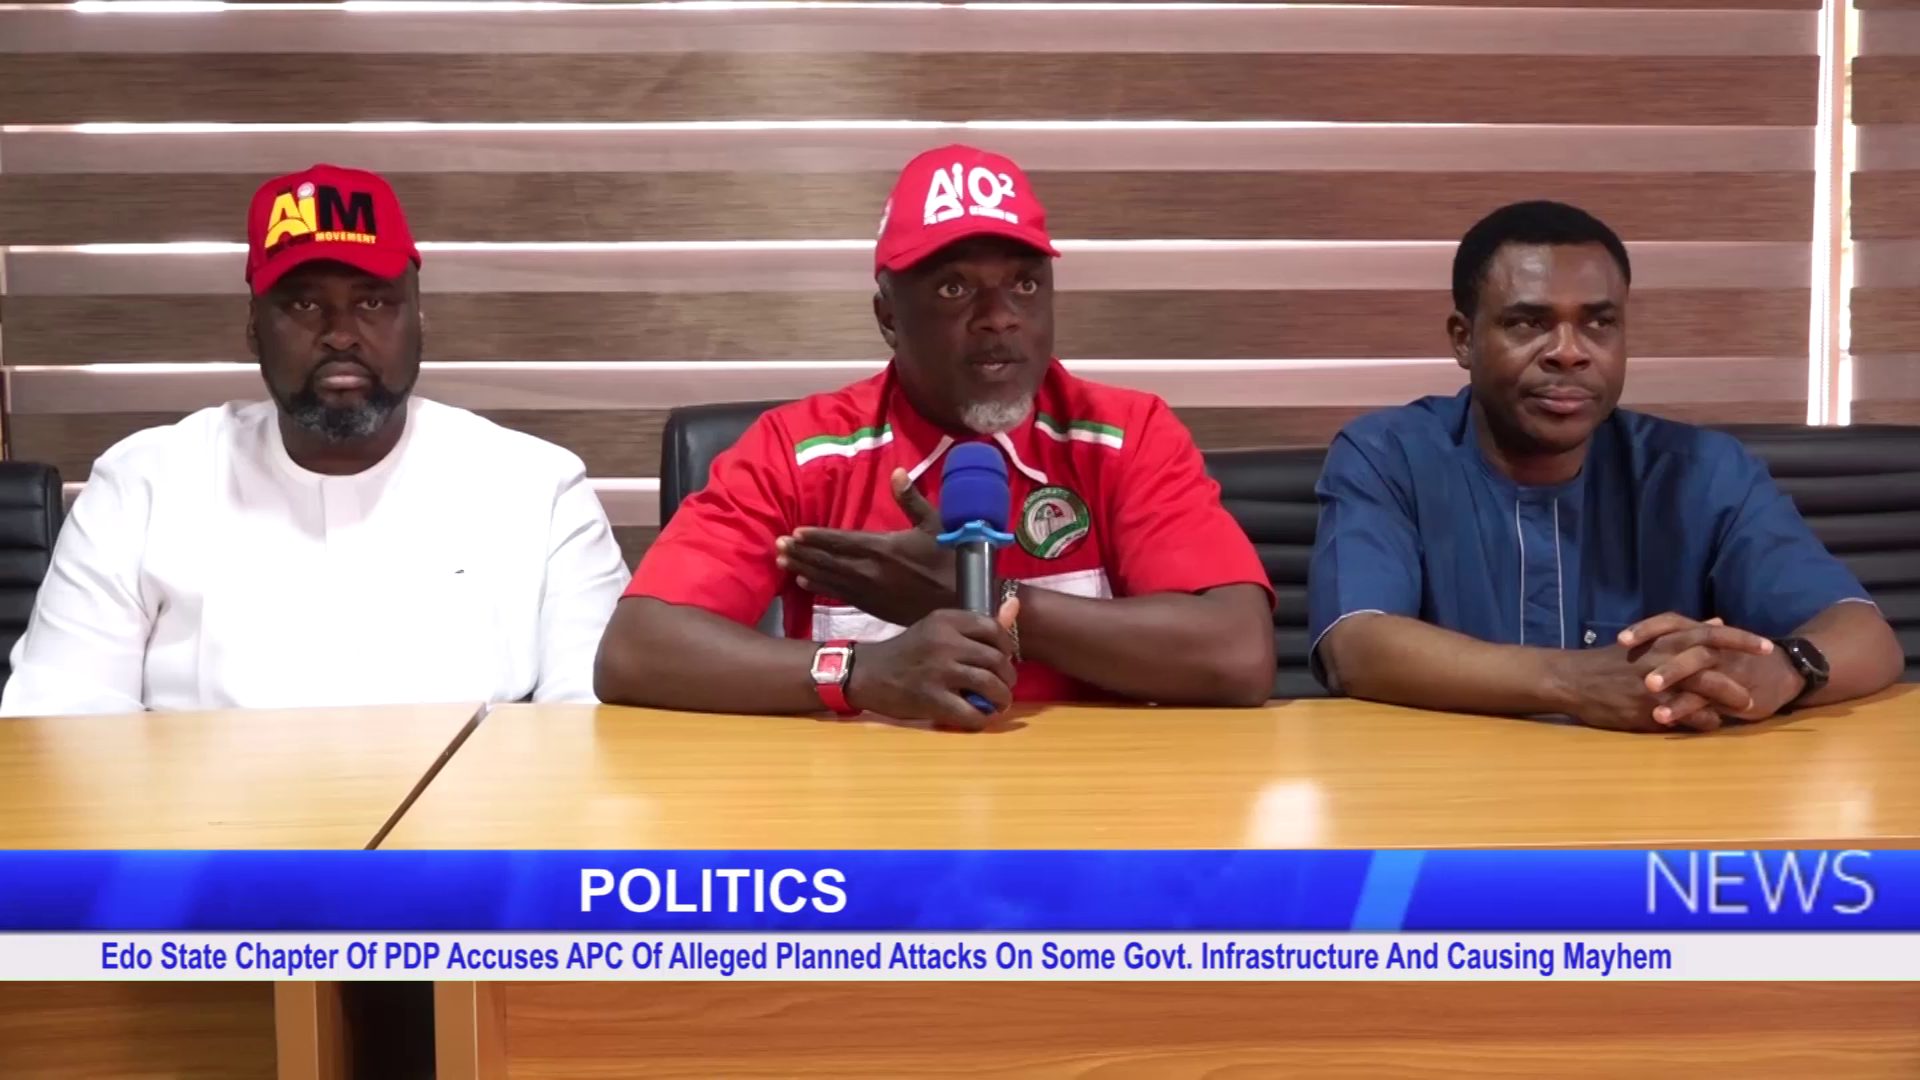 Edo State Chapter Of PDP Accuses APC Of Alleged Planned Attacks On Some Govt. Infrastructure And Causing Mayhem